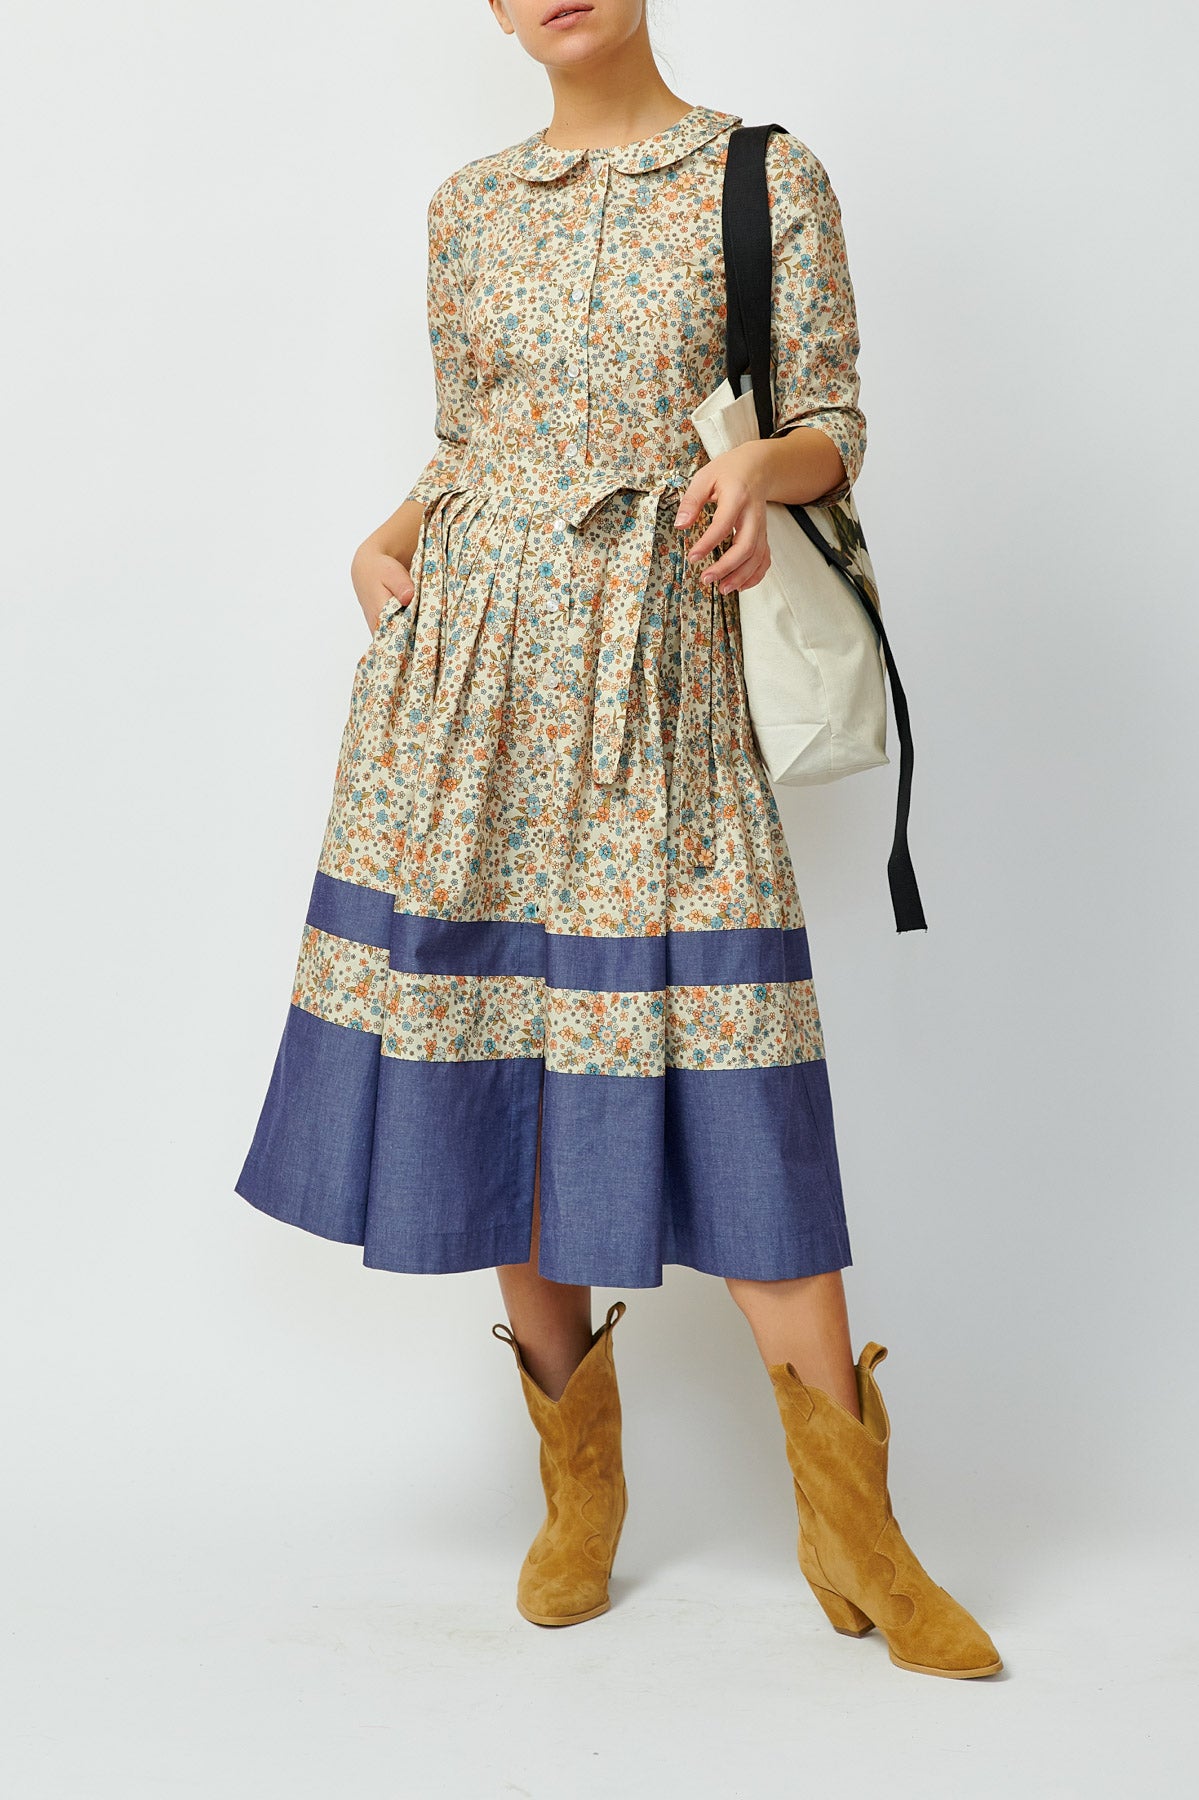 Shirt dress in small flowers and with a navy blue border